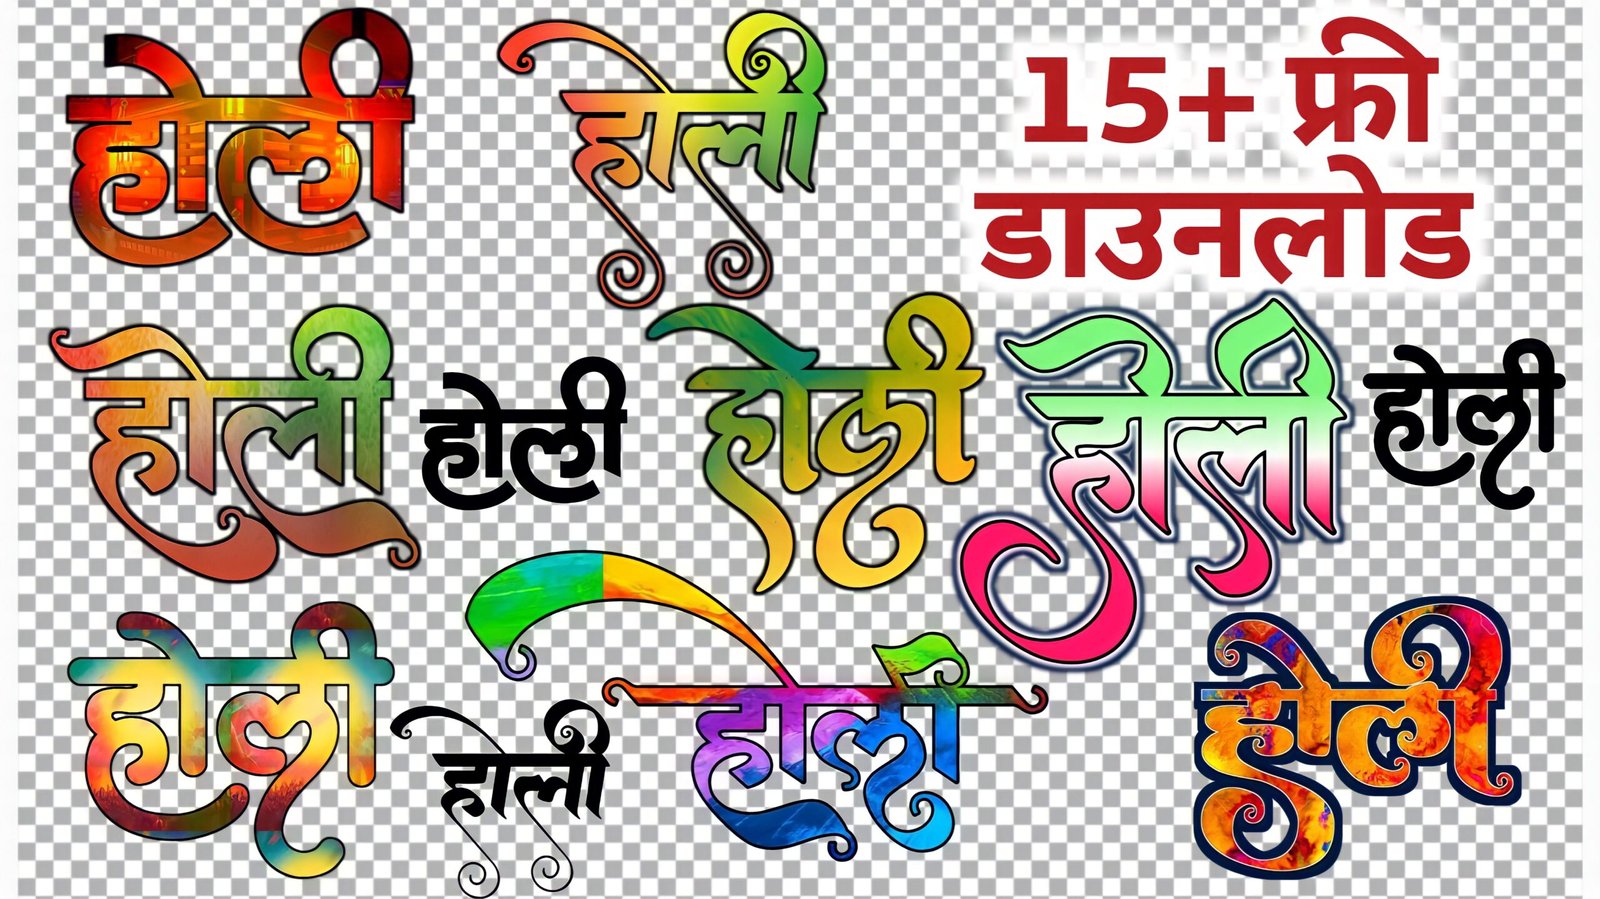 Holi text PNG download| holi text PNG images stylish| how to download holi text PNG image